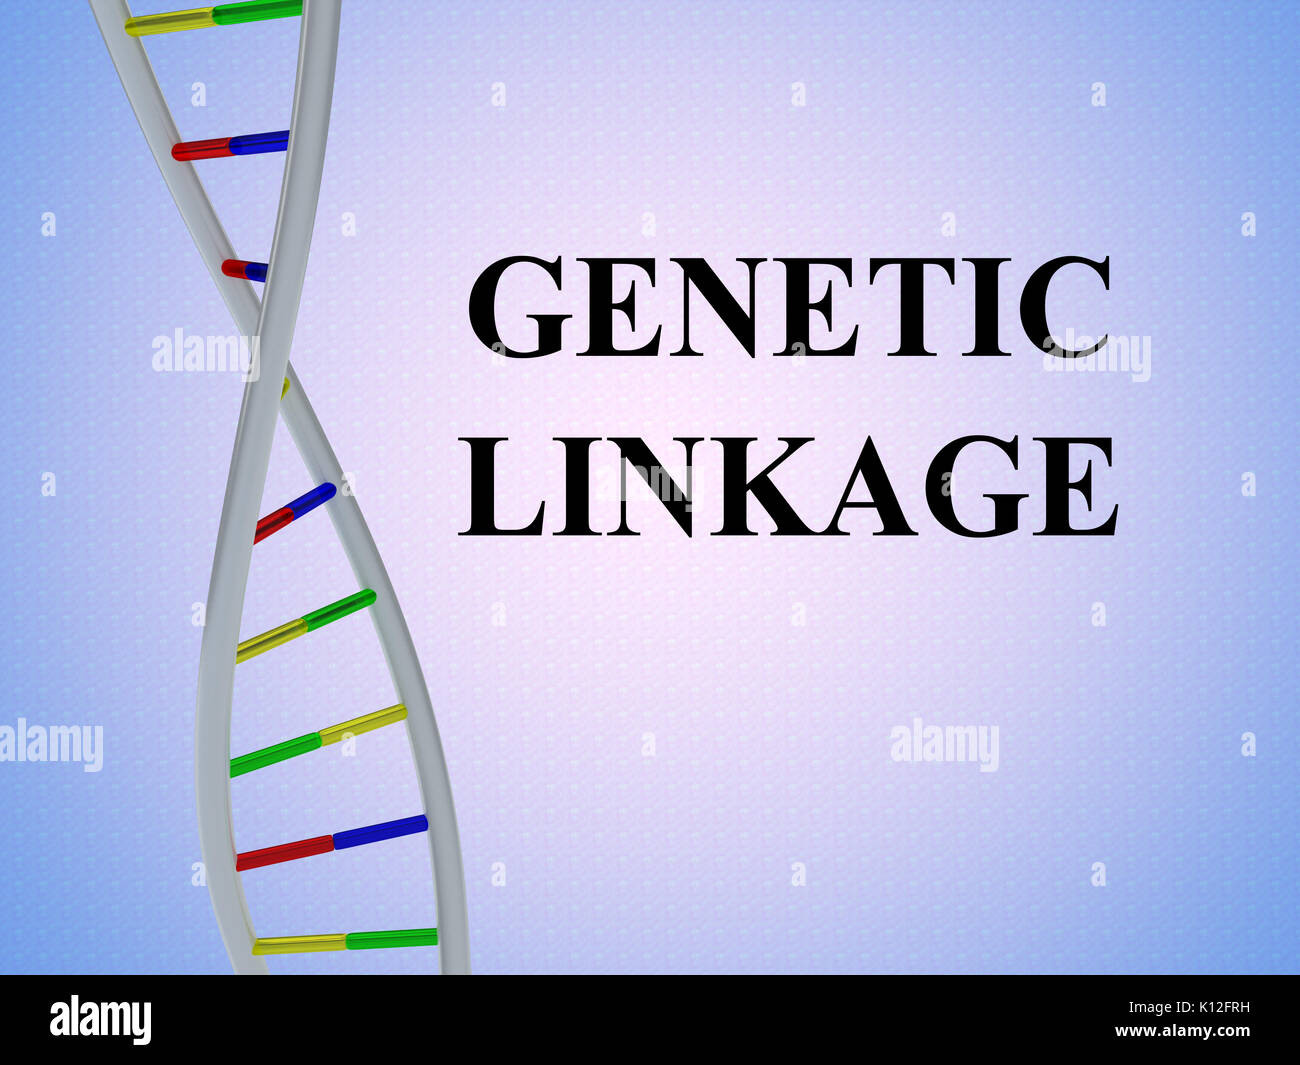 3D illustration of 'GENETIC LINKAGE' script with DNA double helix , isolated on colored pattern. Stock Photo